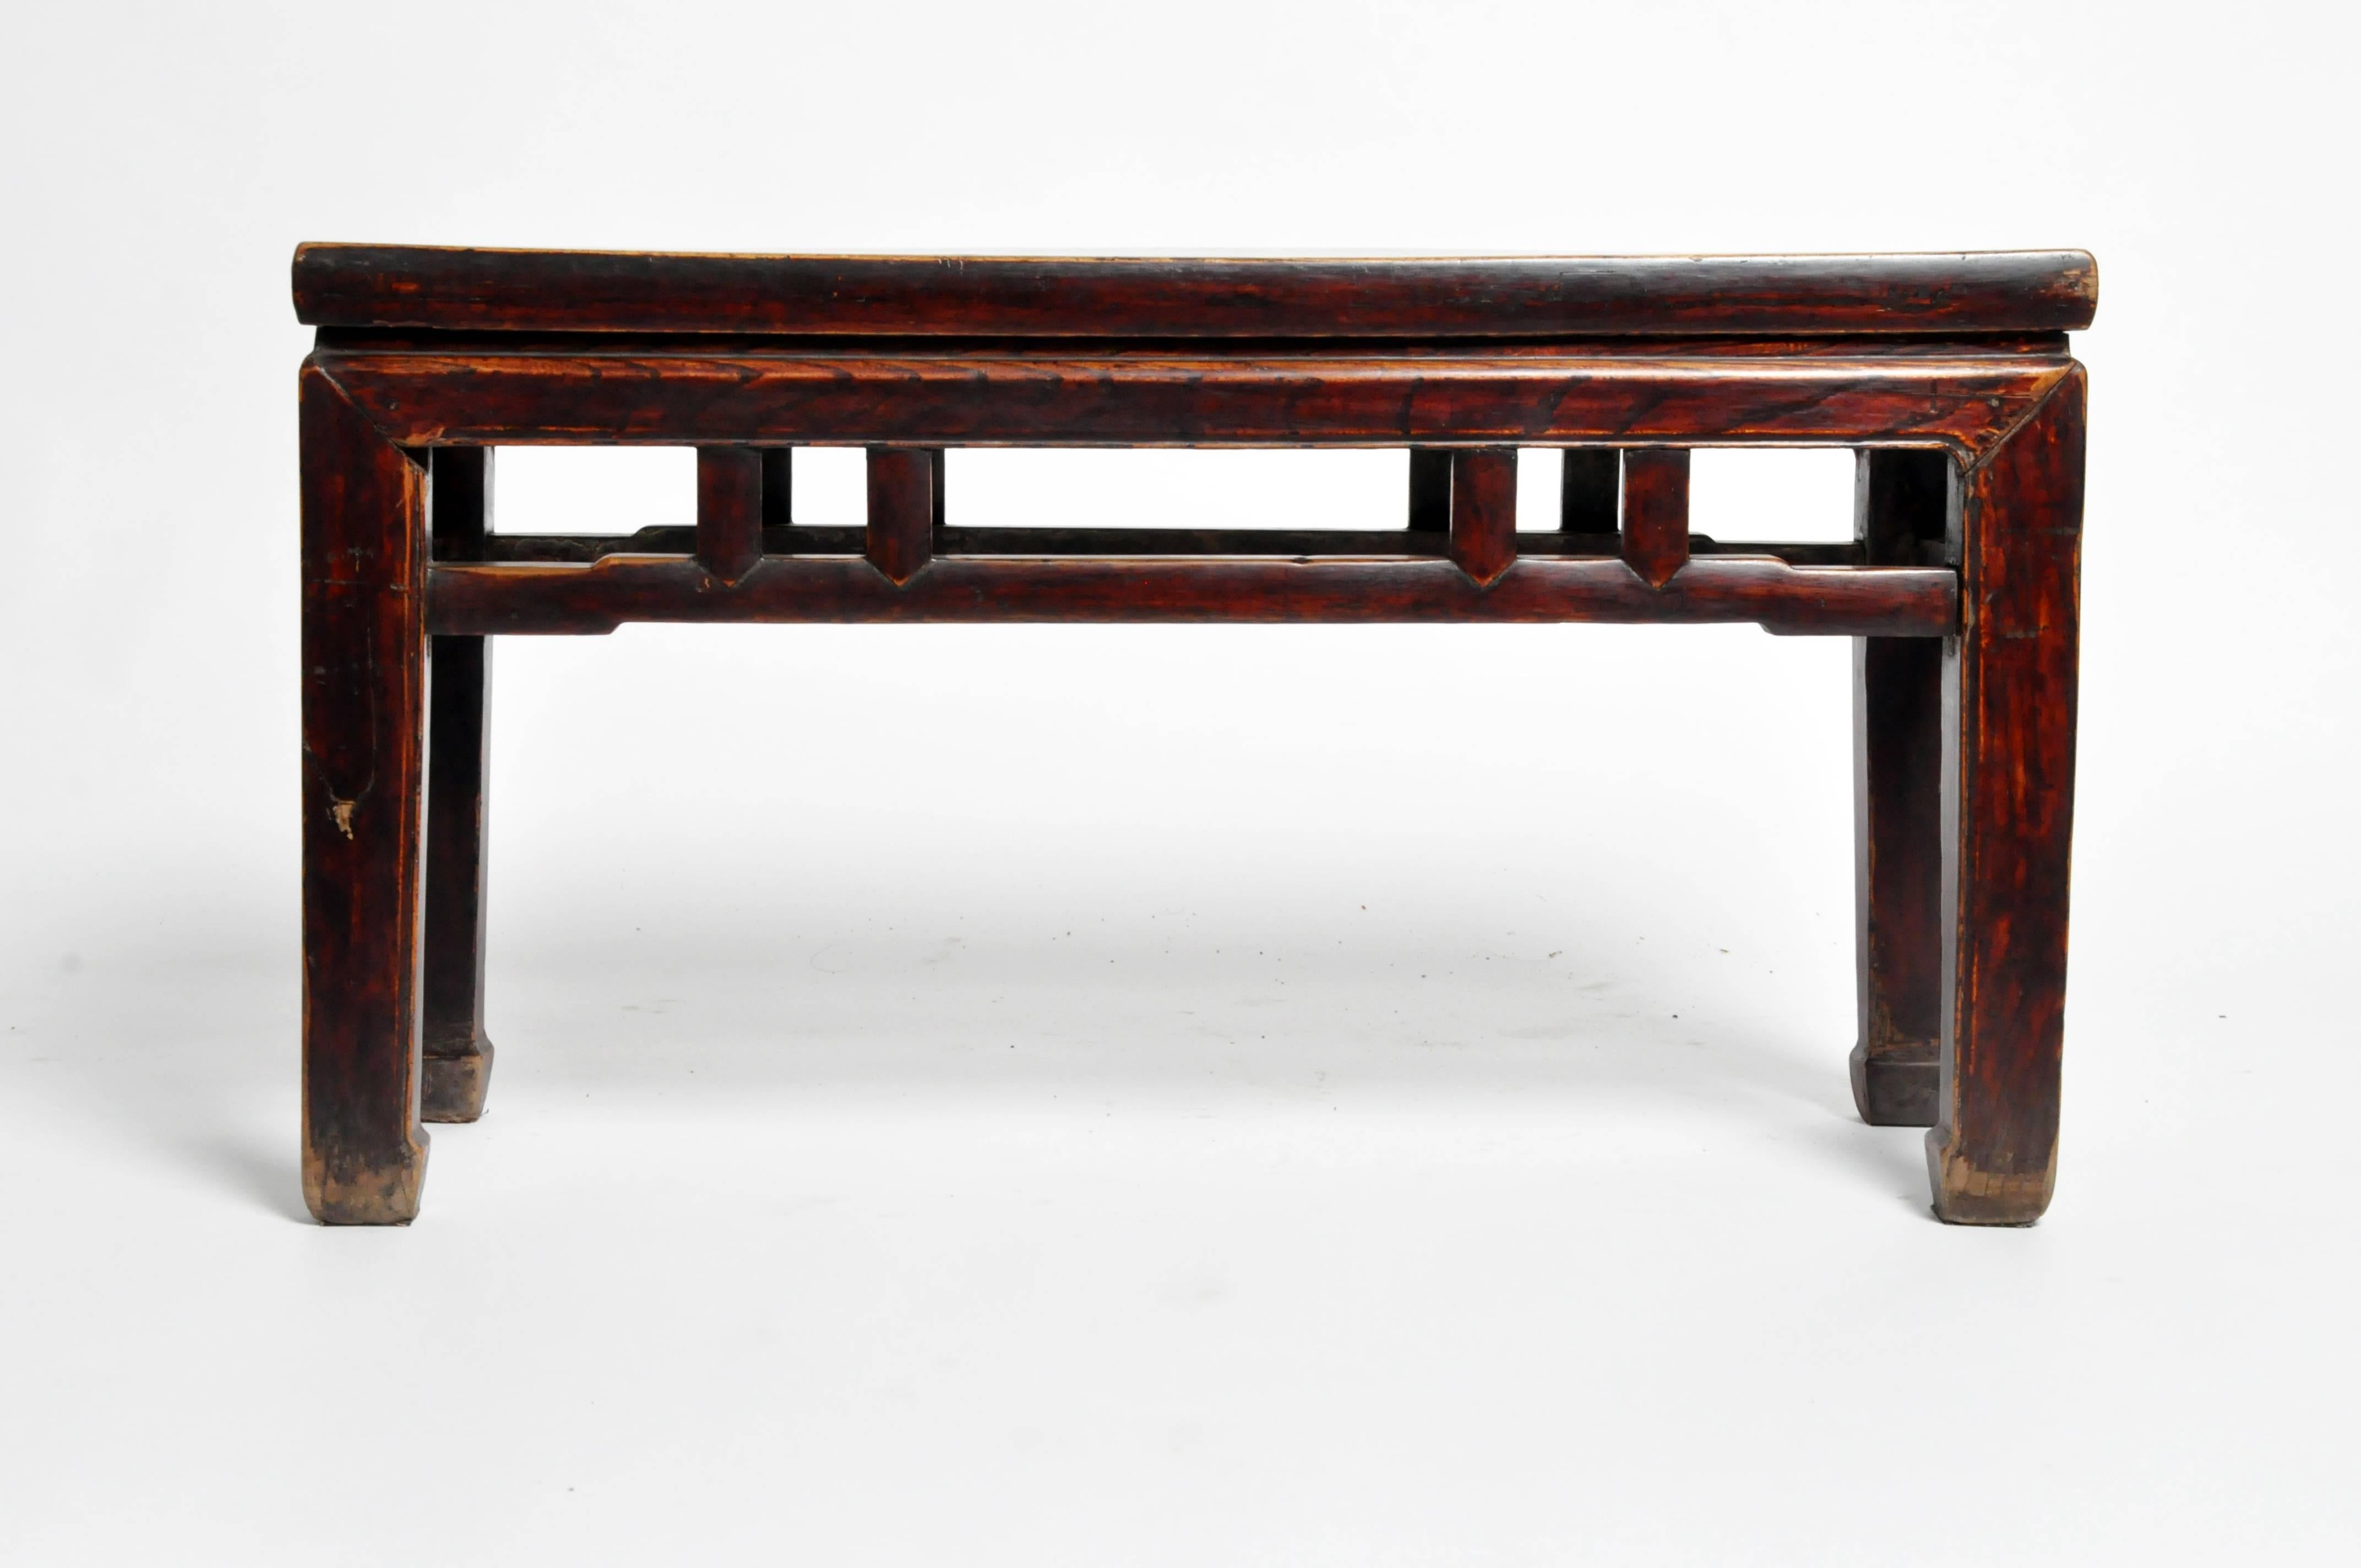 Elm Qing Dynasty Rectangular Chinese Bench with Original Lacquer